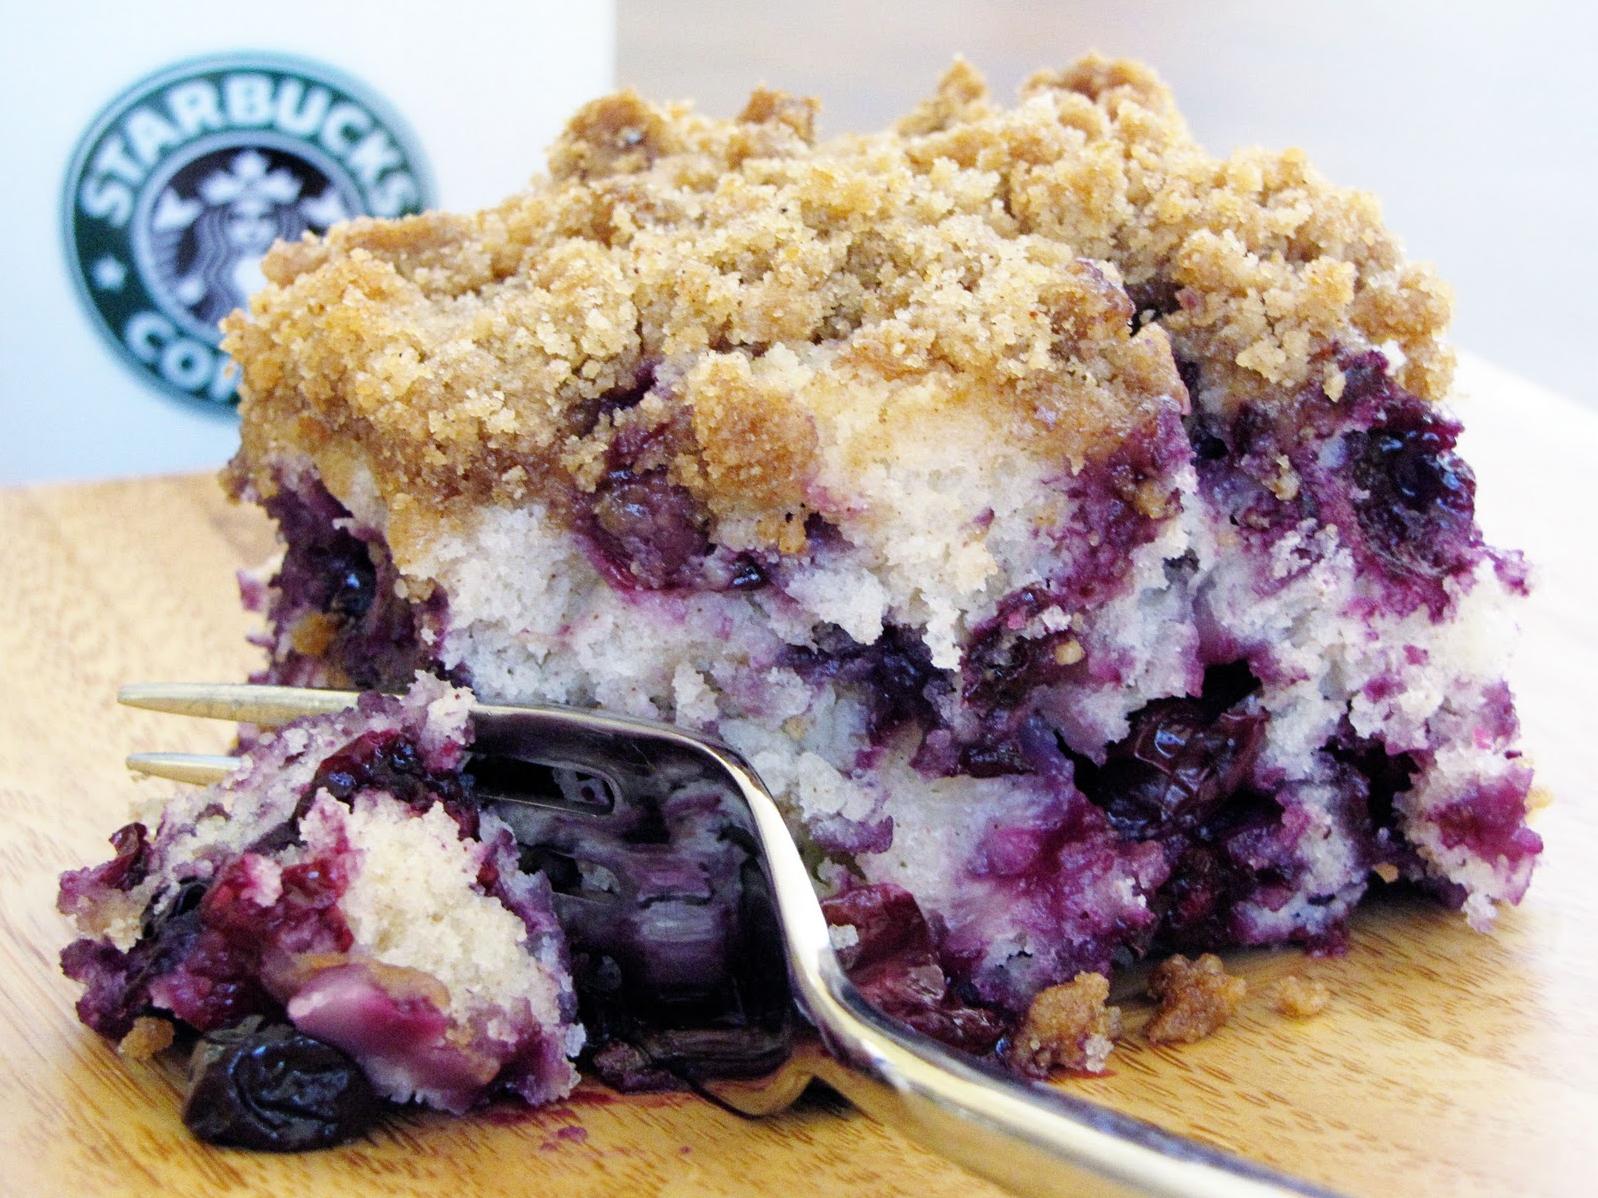  Wake up to a slice of heavenly blueberry-crunch coffee cake!